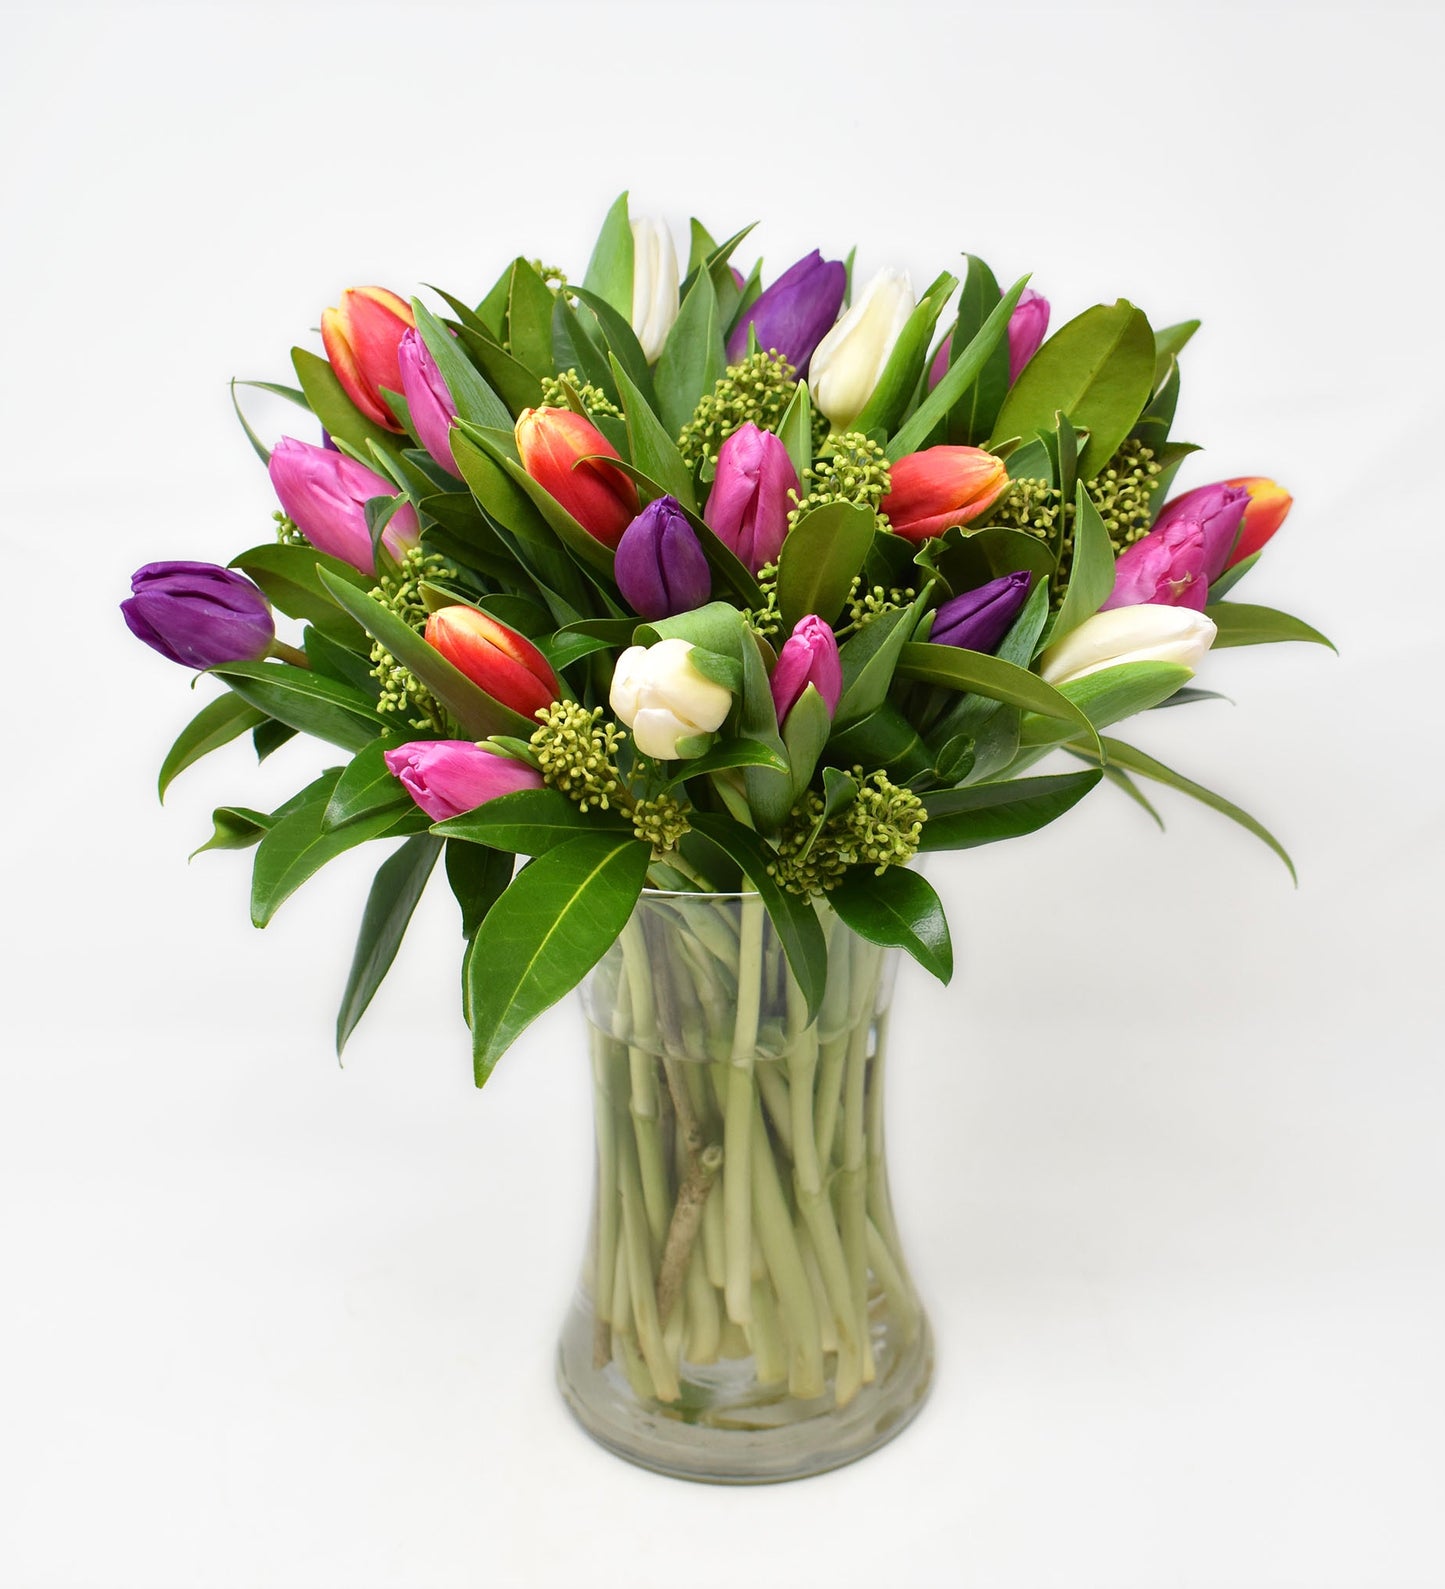 Brightly coloured tulips in a tall vase